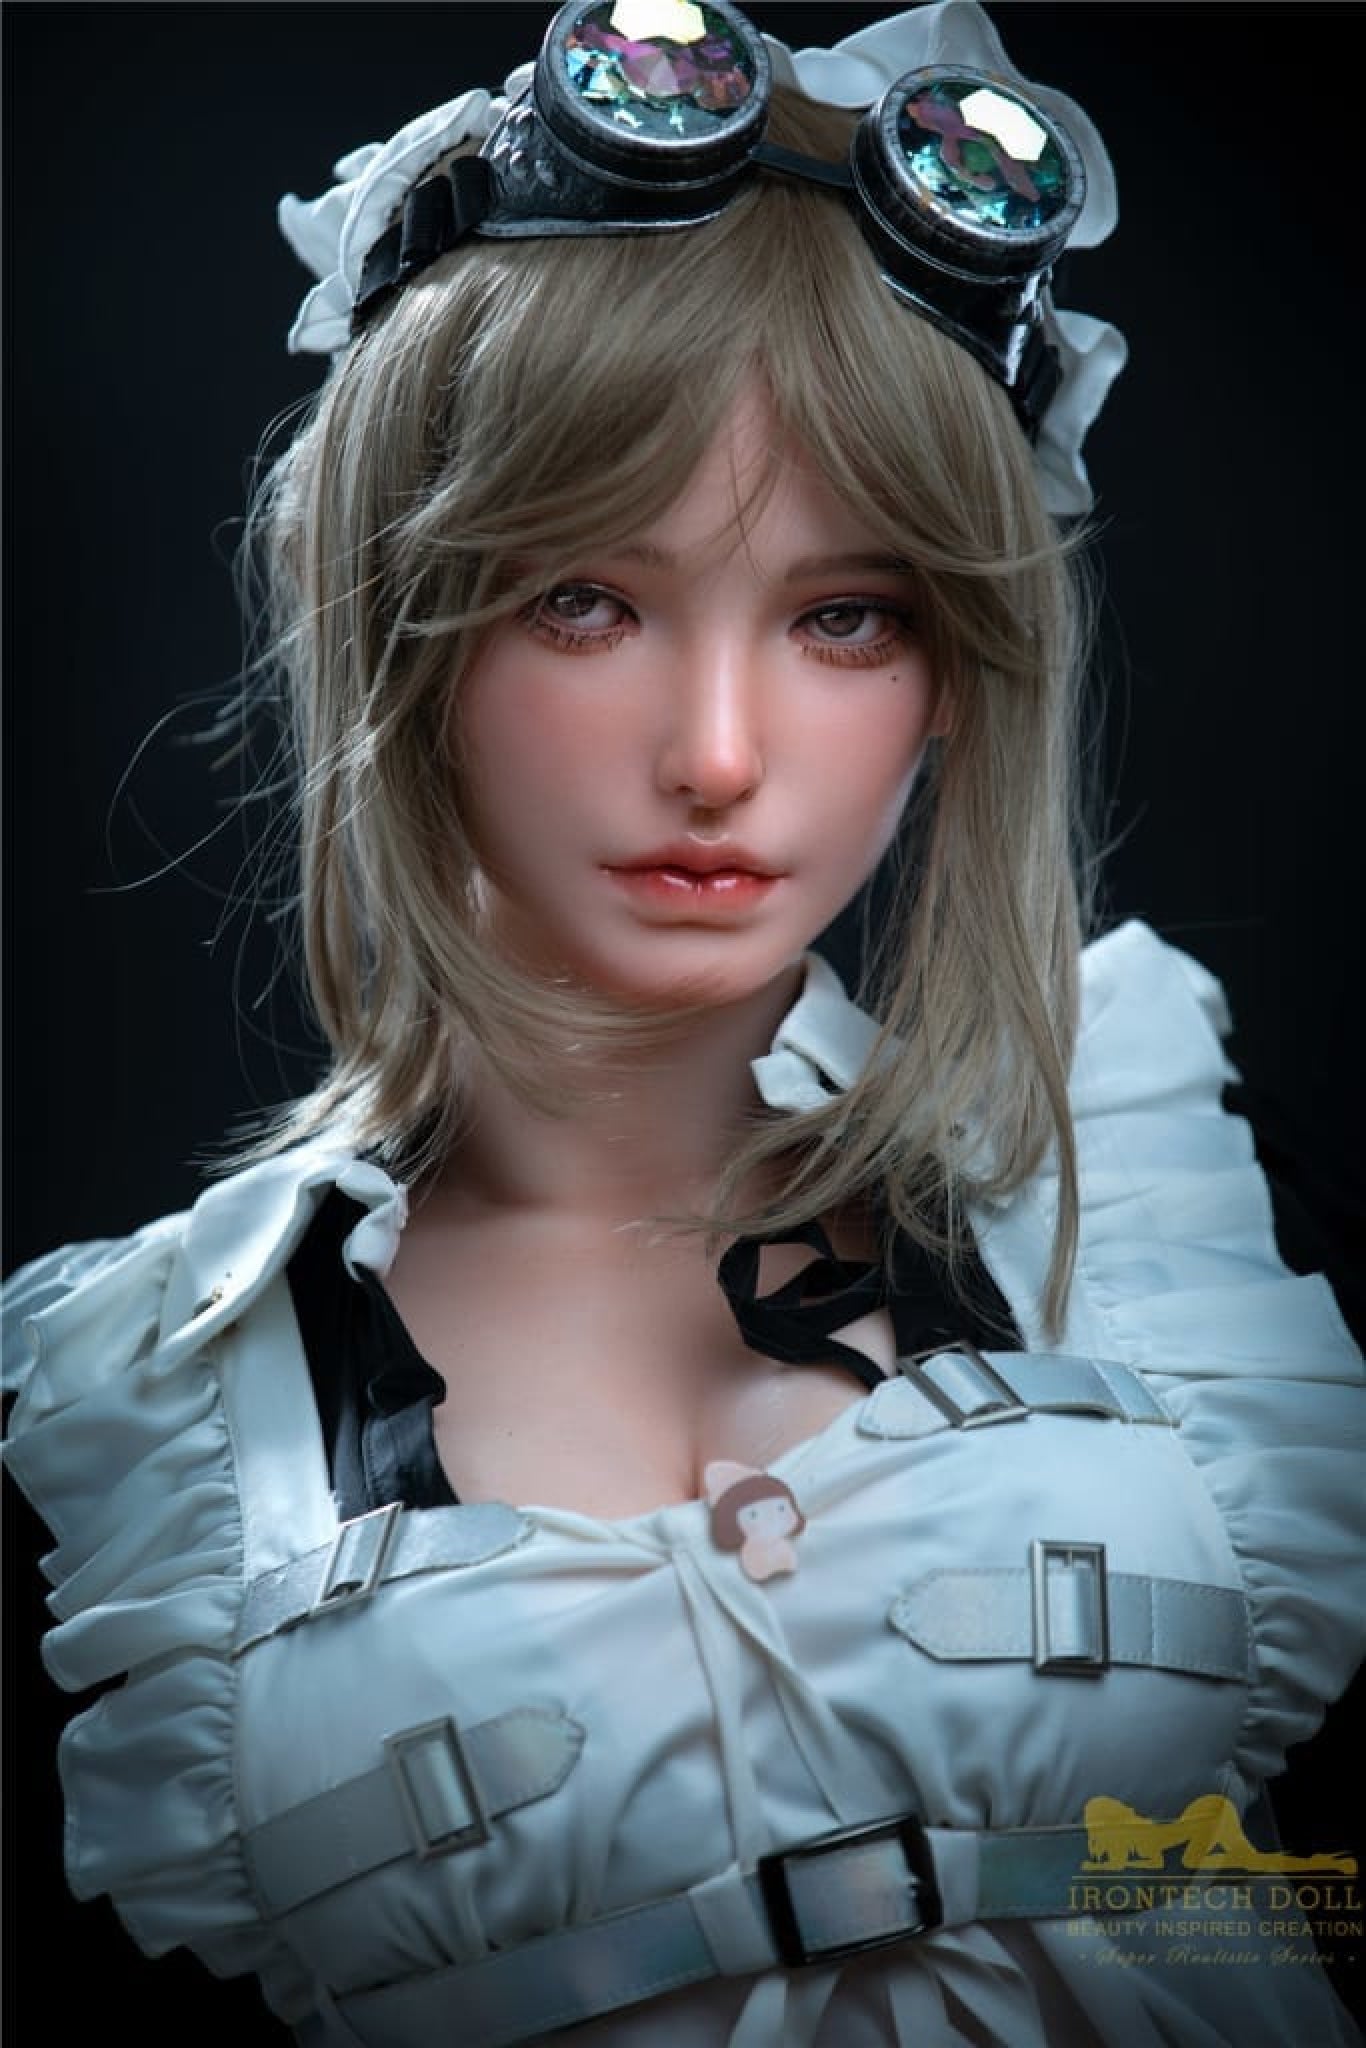 Eva Blonde full Silicone - IronTech Doll® Irontech Doll®